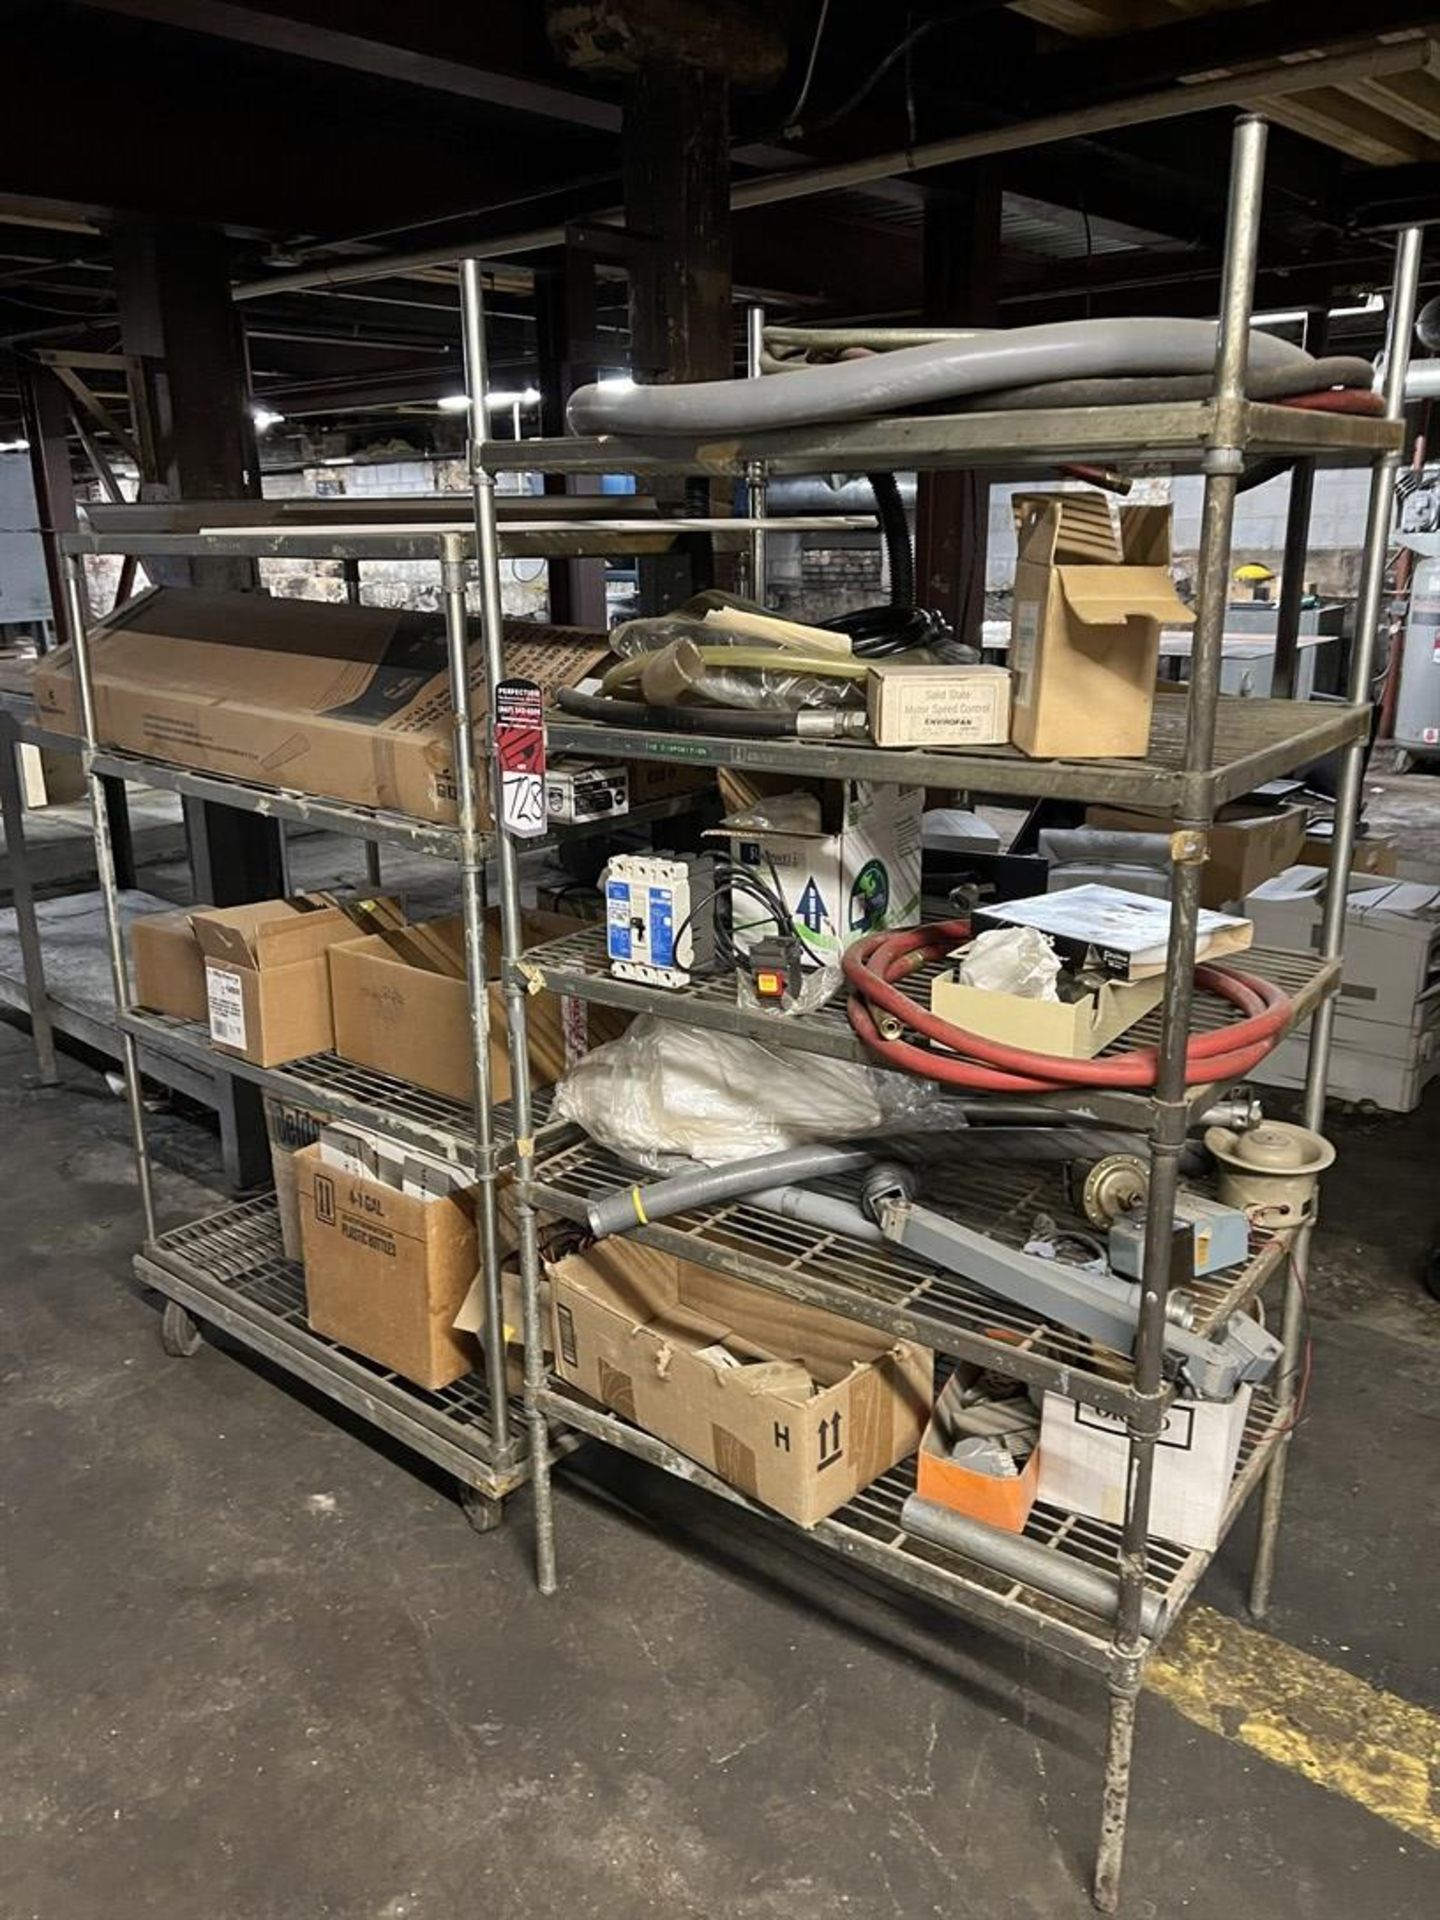 Lot of (2) Shelving Units w/ Lights, Speed Control, Hose, and Circuit Breaker